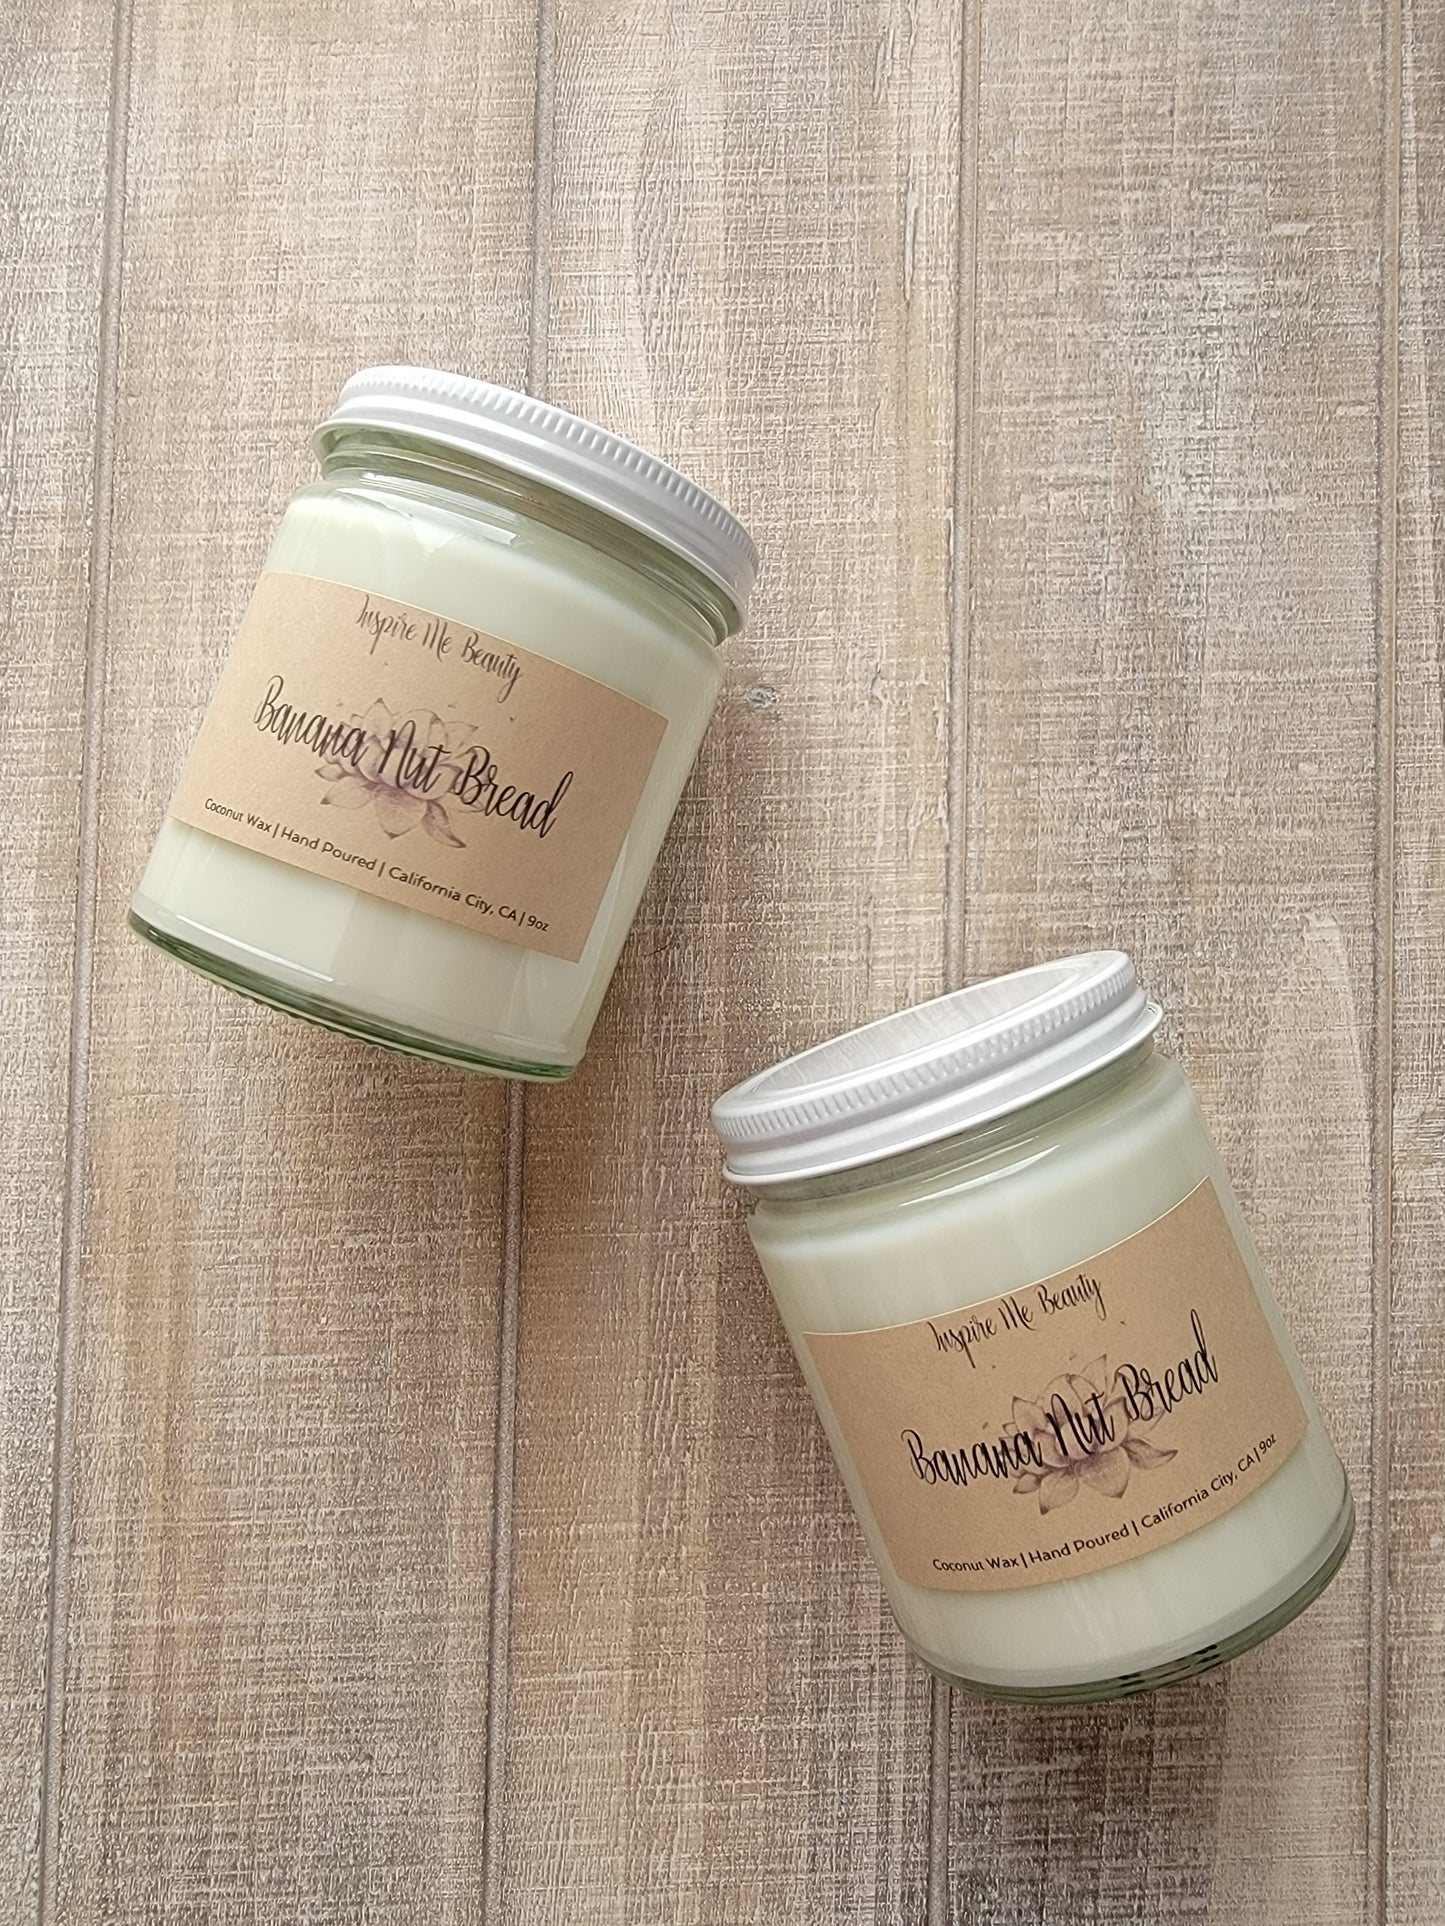 Banana Nut Bread Candle from Inspire Me Beauty made of Coconut Wax